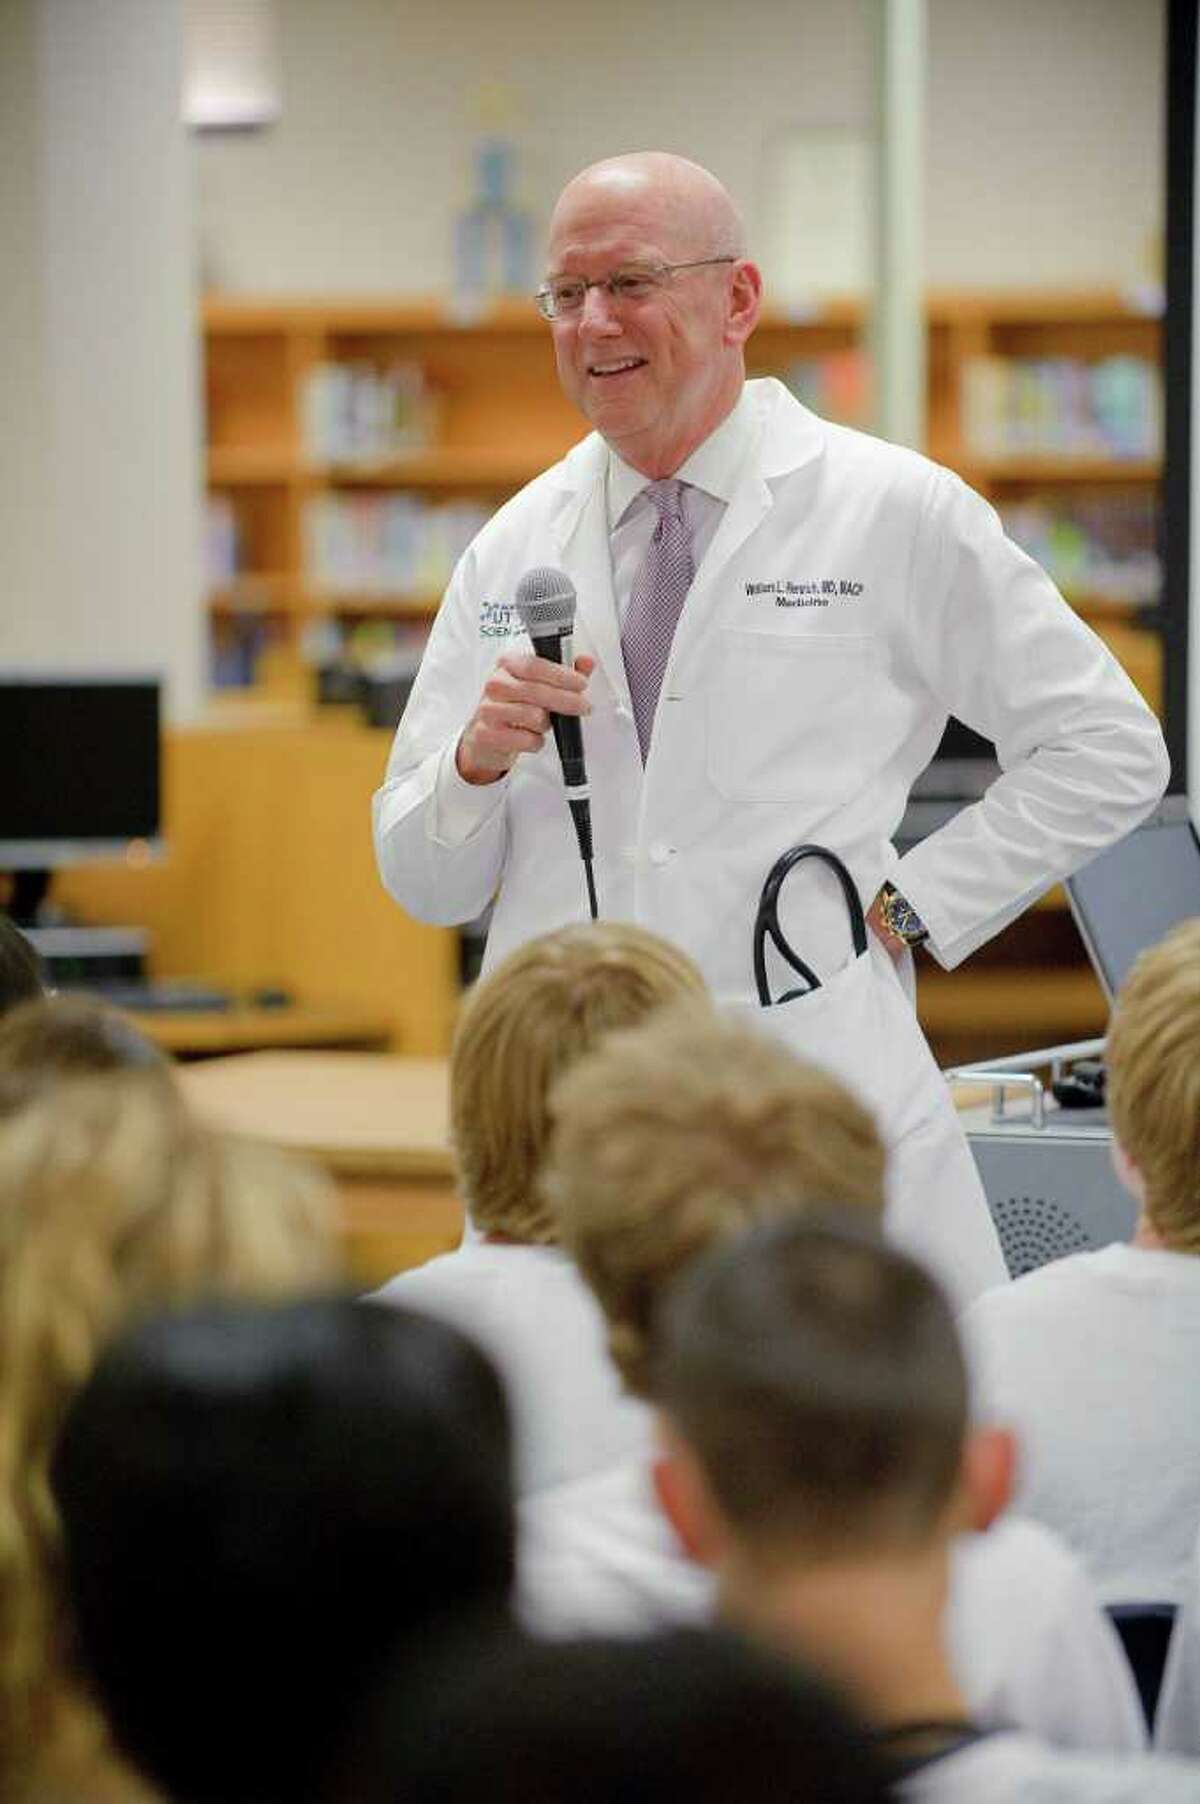 Dr. William Henrich, president of the UT Health Science Center San Antonio, addresses the ninth- to 12th-grade science classes at Health Careers High School in the Northside Independent School District. Henrich is a nephrologist, a specialist in the function and diseases of the kidney.